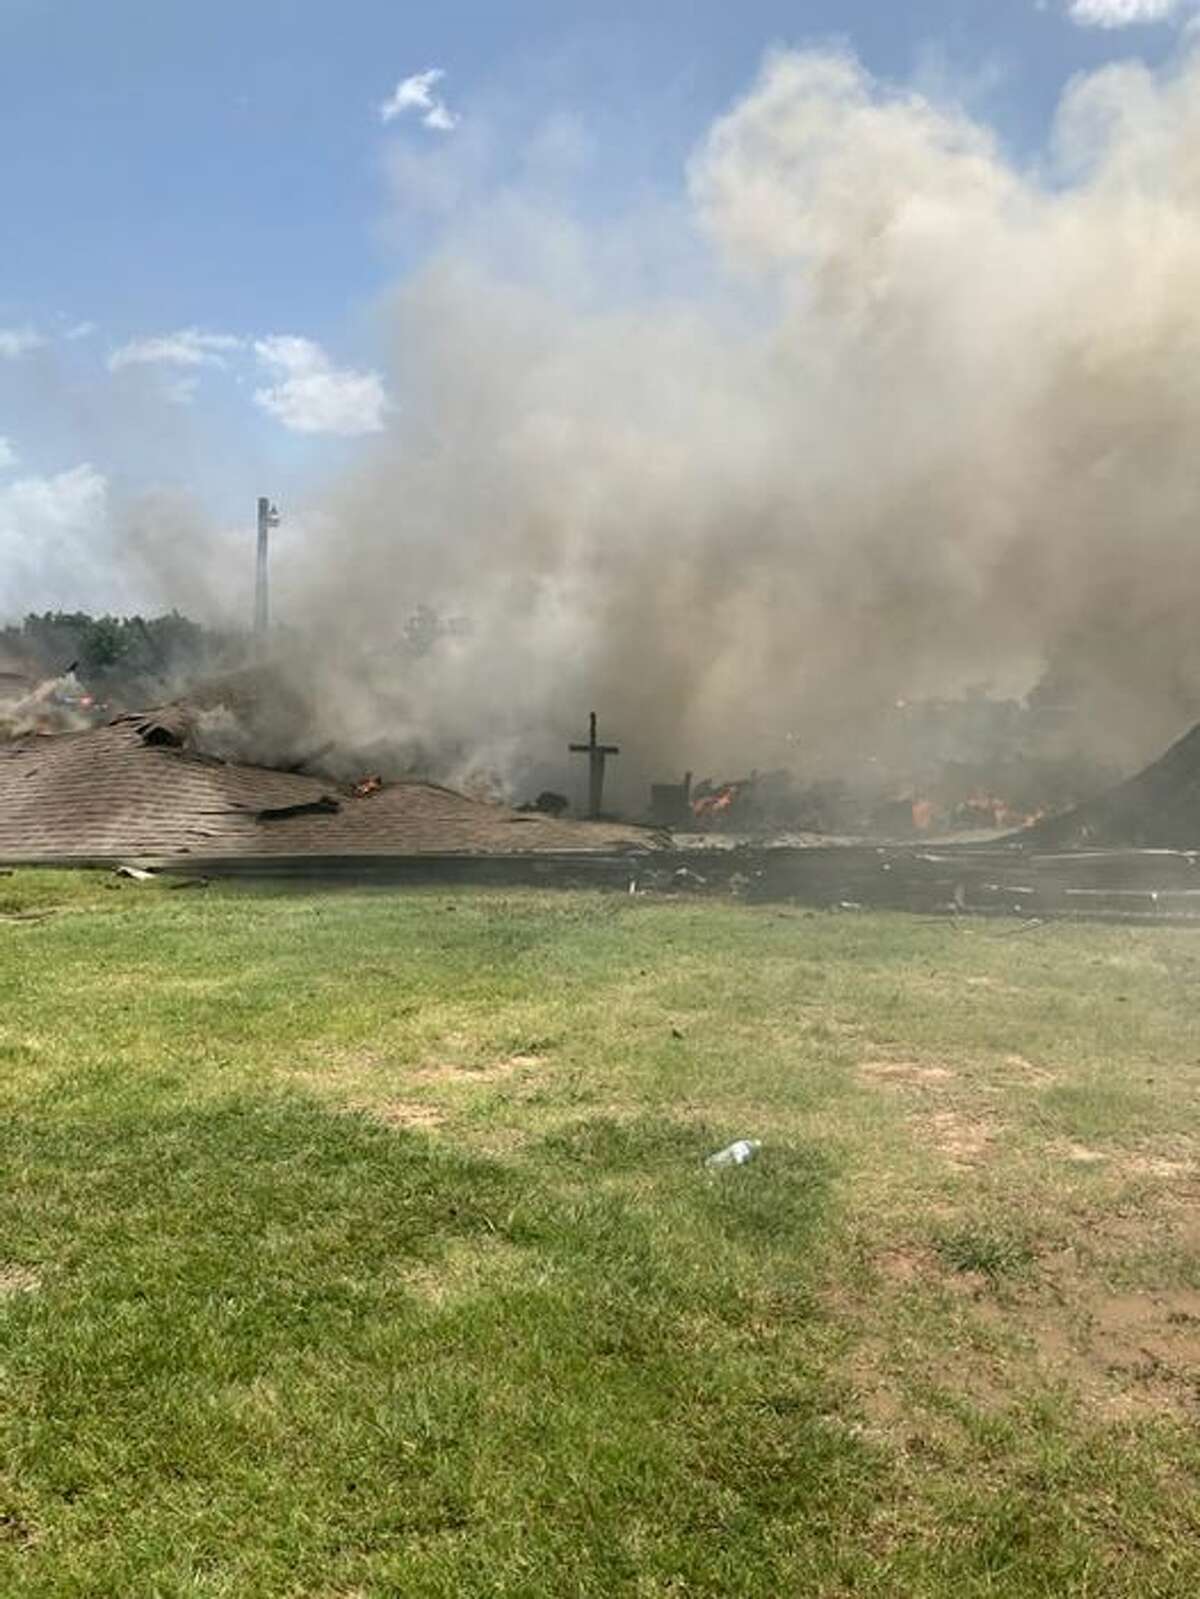 A fire destroyed the Balsora Baptist Church but when the smoke cleared, a cross was left standing.